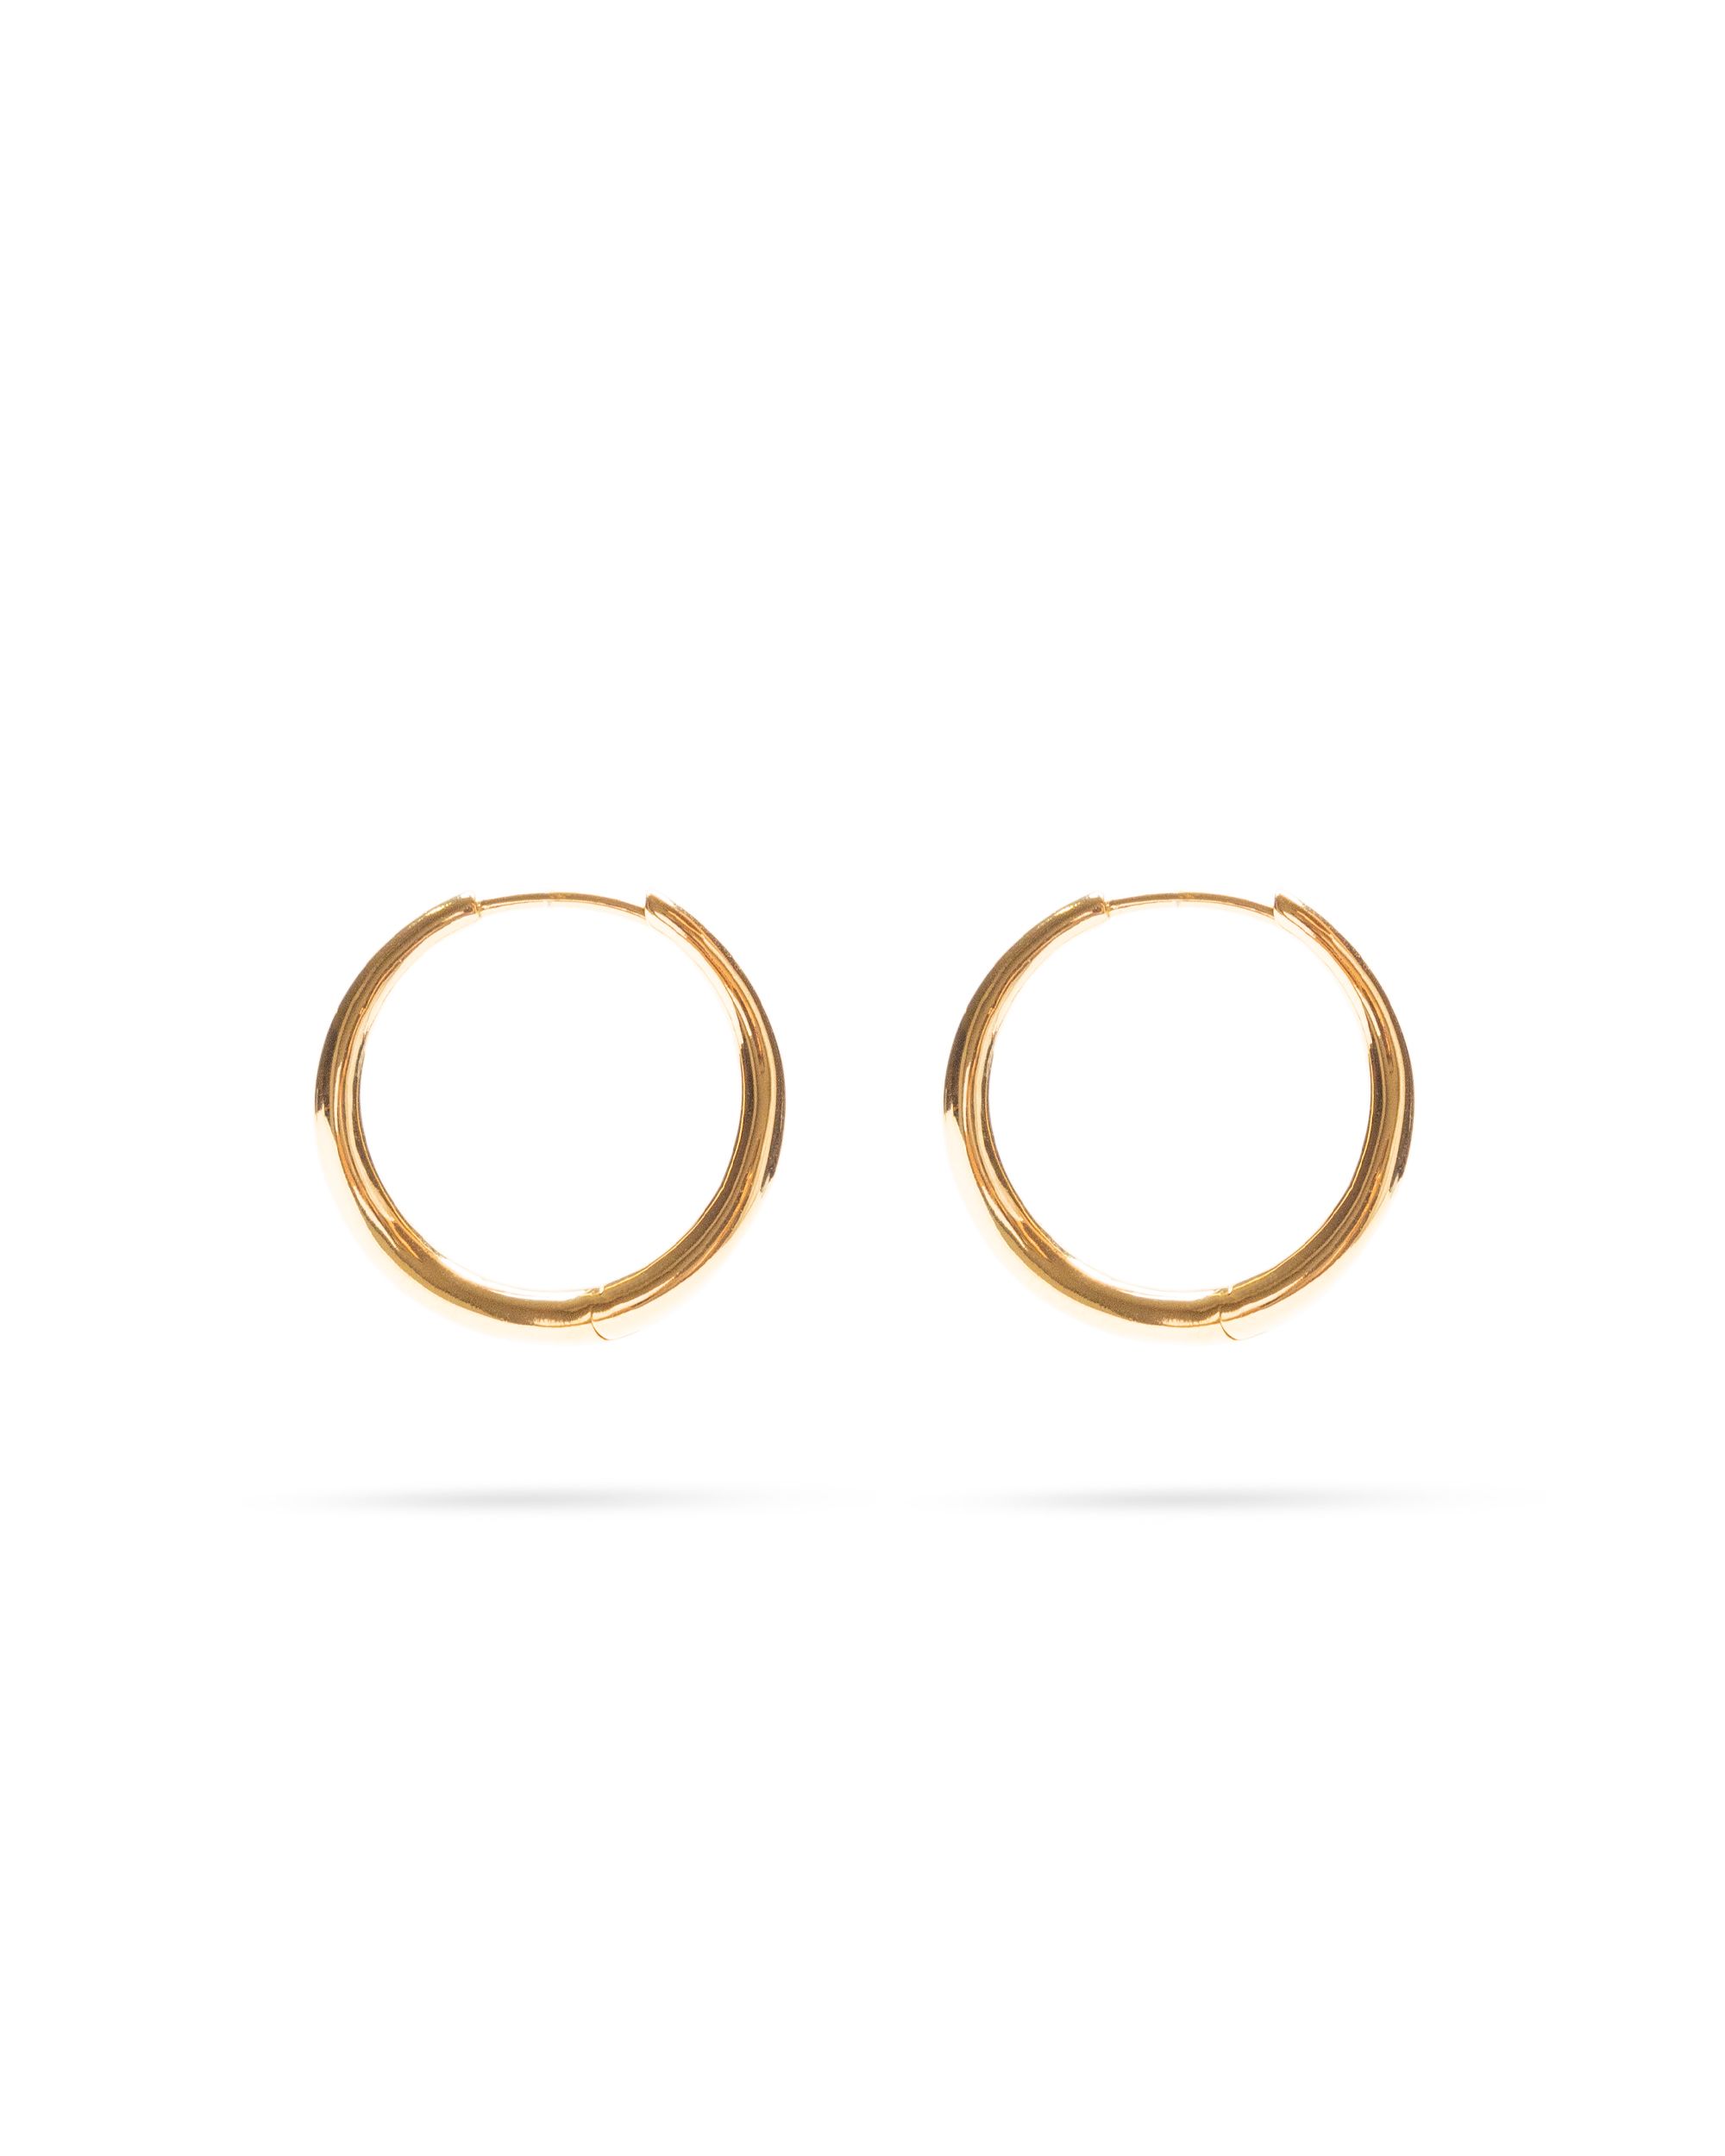 Product Image for Momento Large Hoops, 14k Gold Vermeil